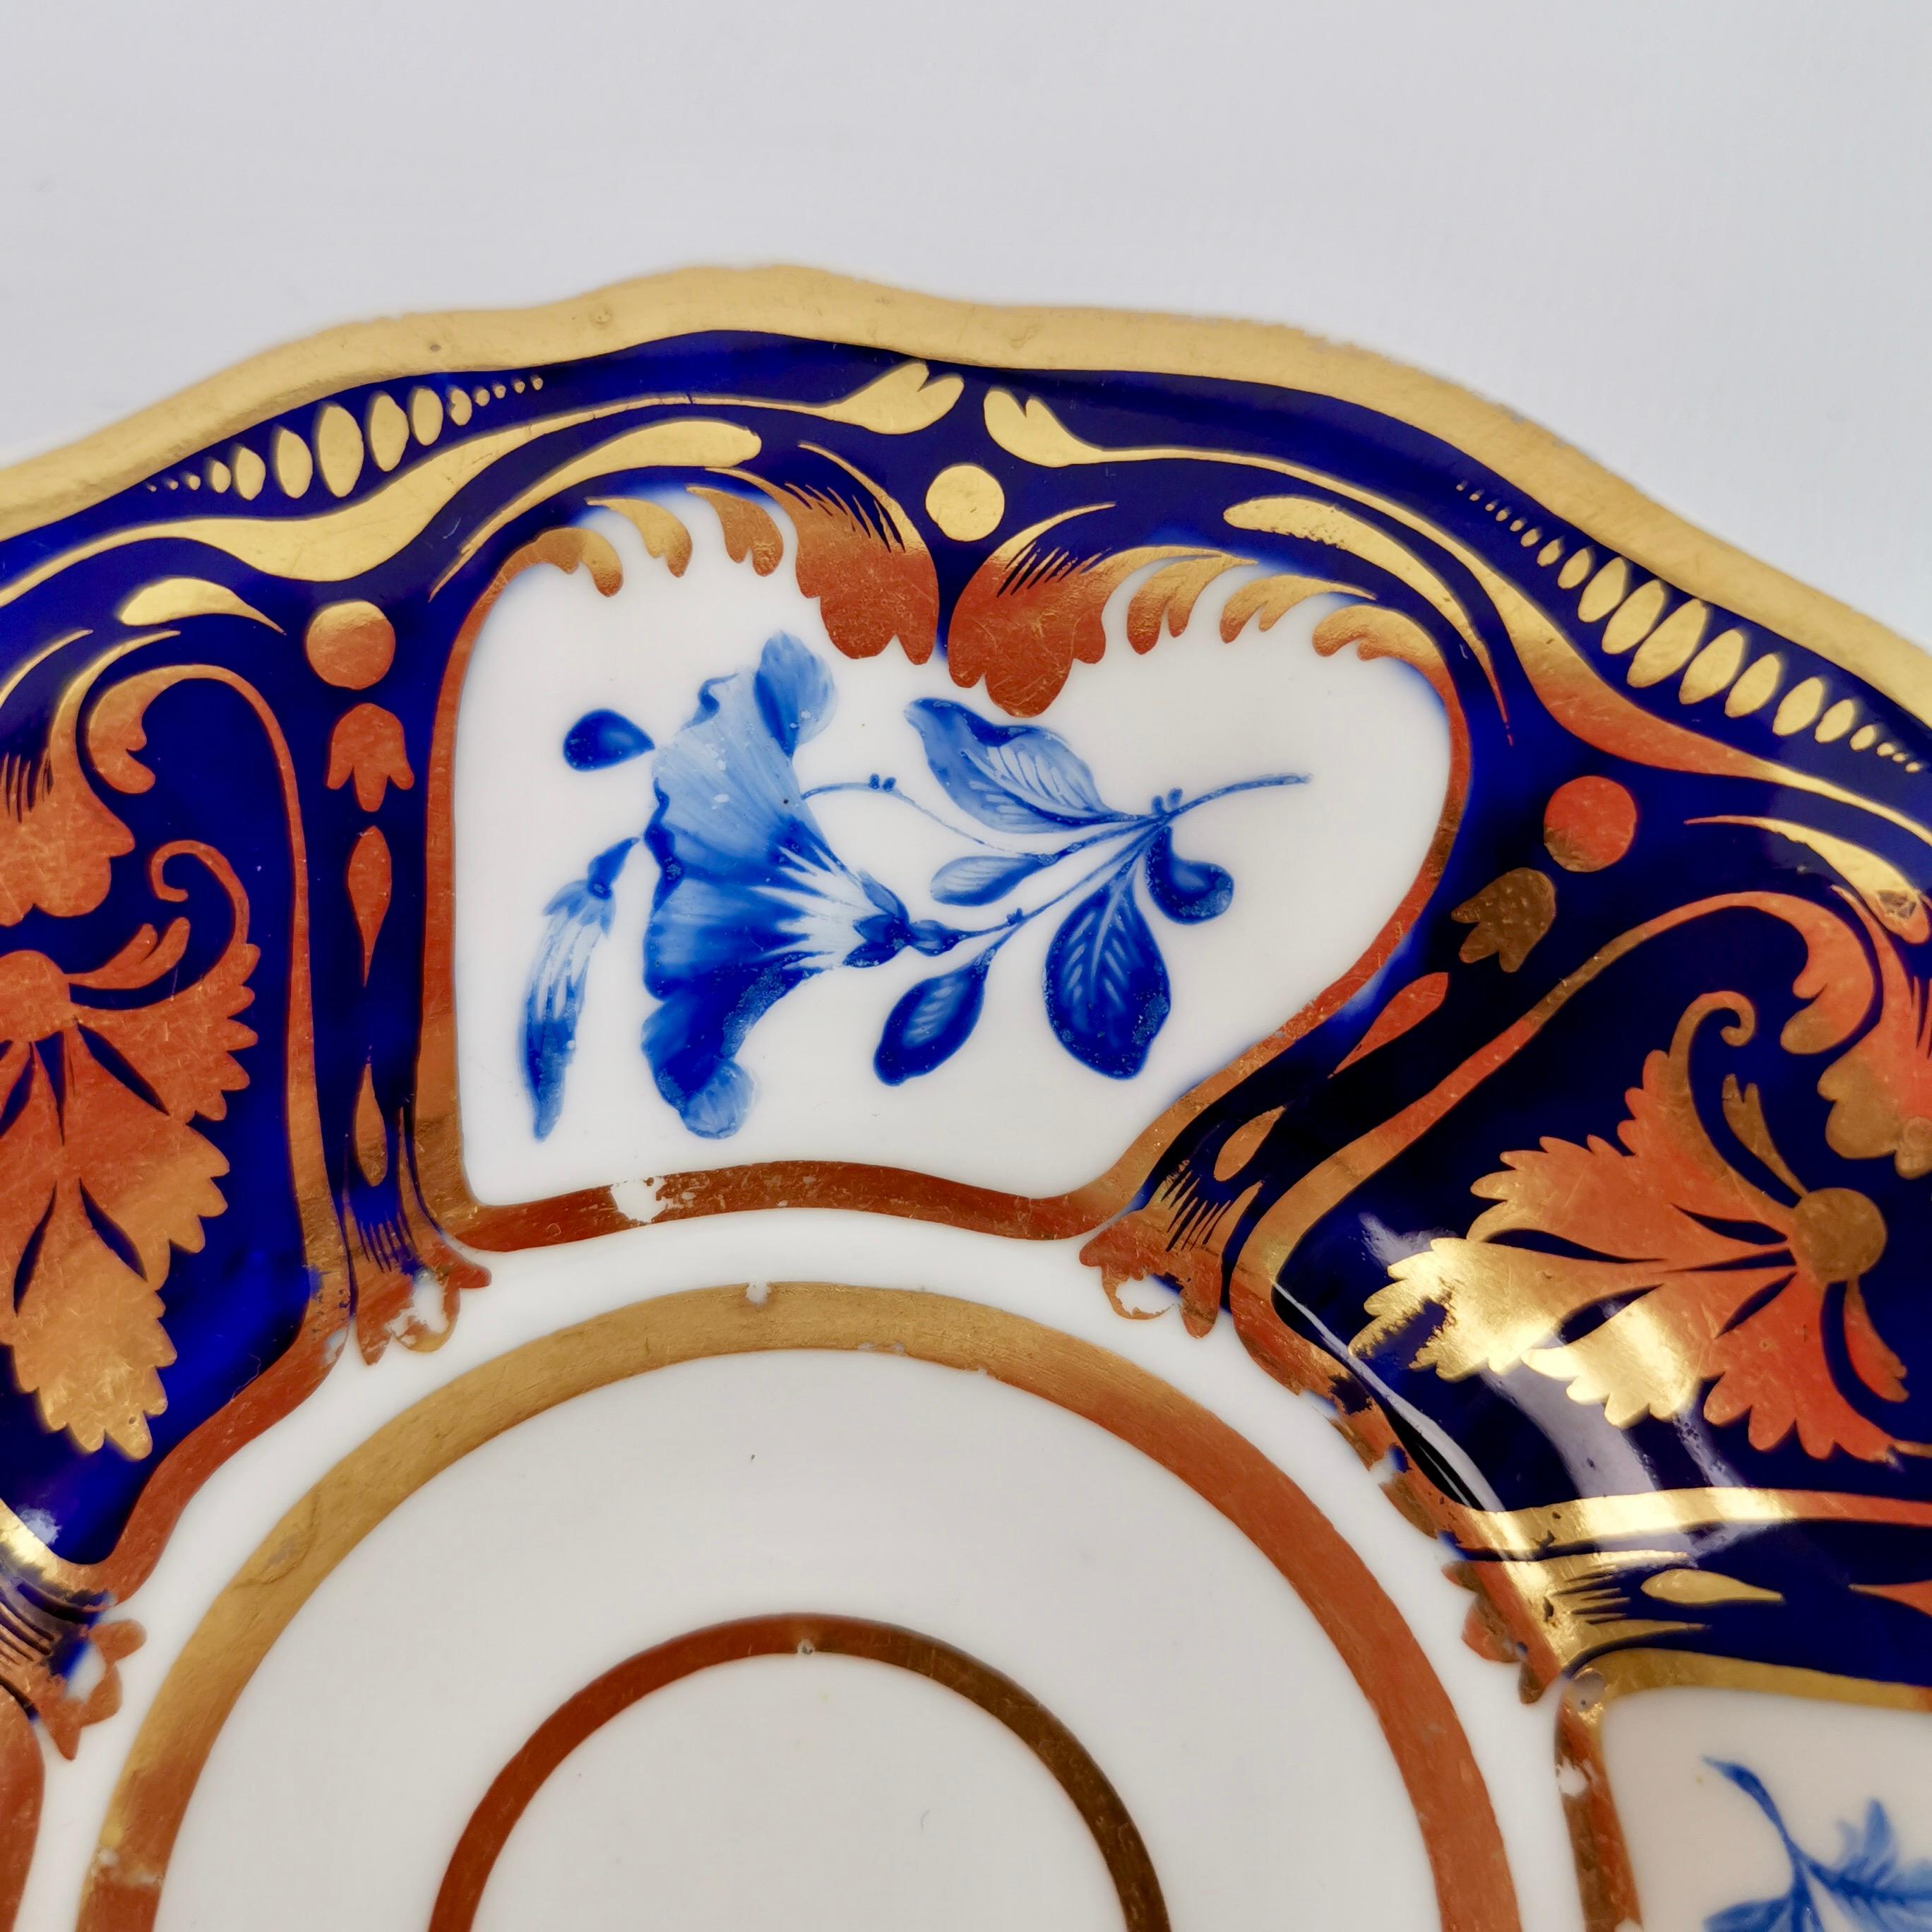 Early 19th Century Ridgway Teacup and Saucer, Blue and Gilt, Flowers Patt. 2/1000, Regency ca 1825